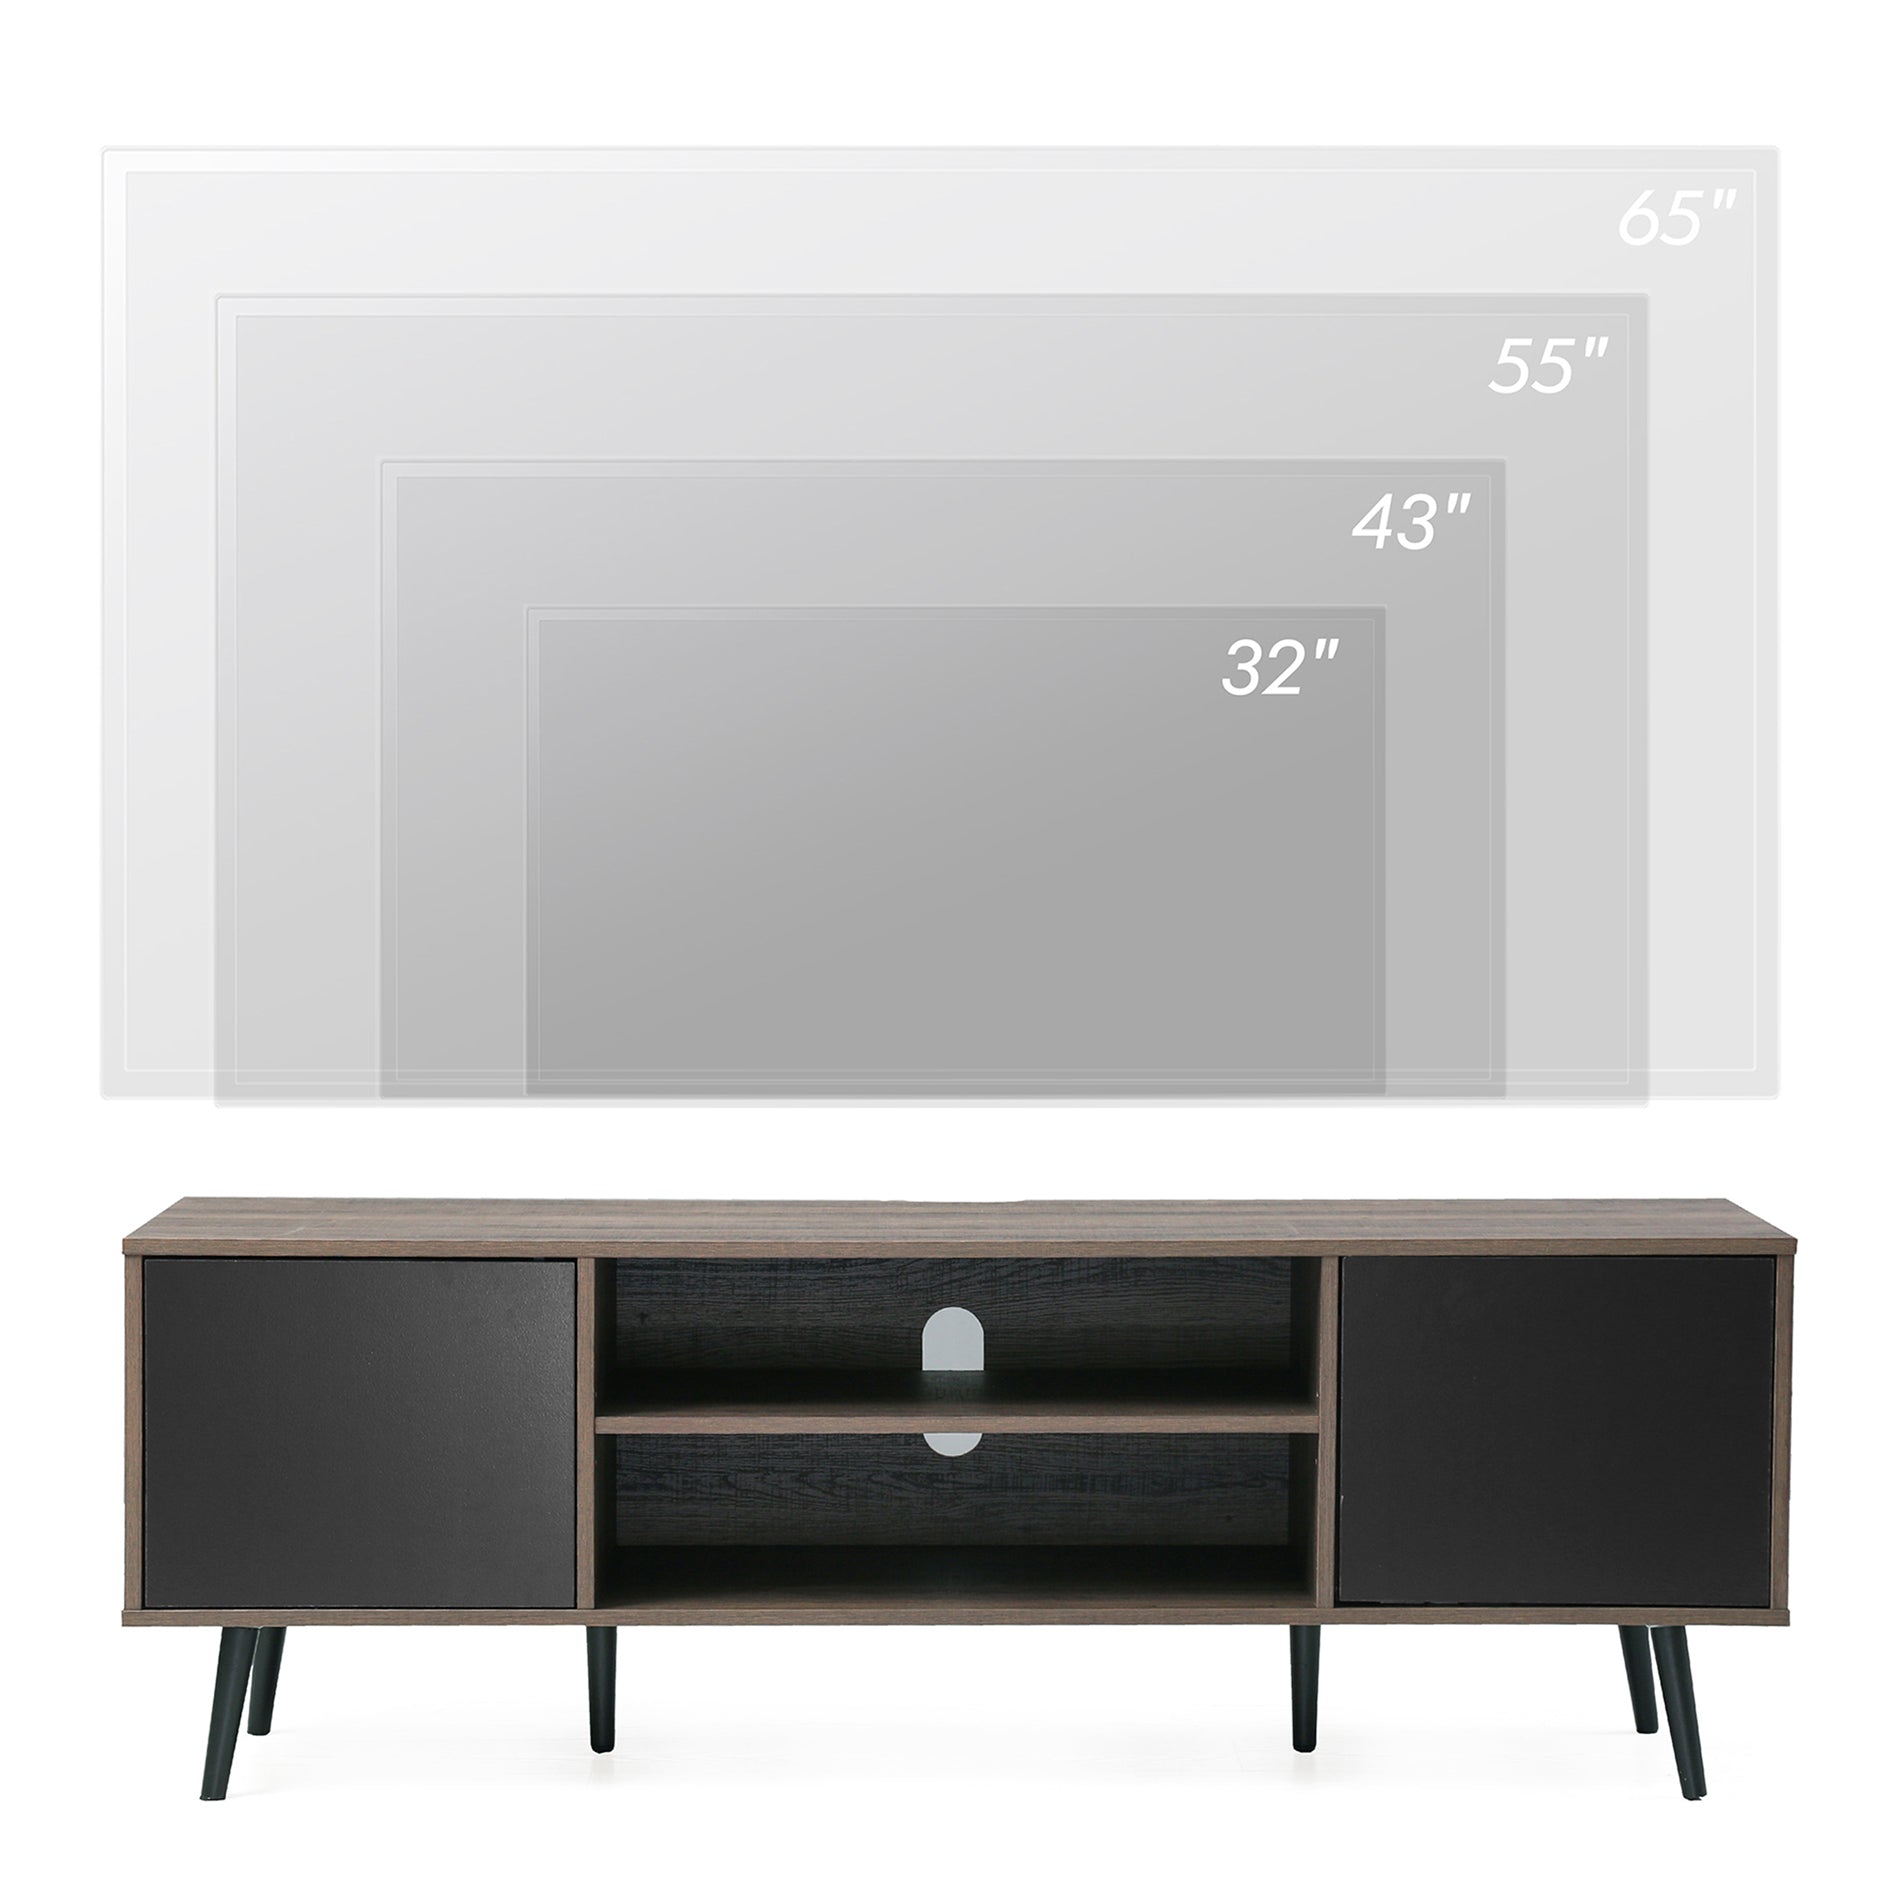 WAMPAT 60" Mid-Century Modern TV Stand for 32-65 Inch TV, Wood TV Console Media Cabinet with Yellow LED, Black